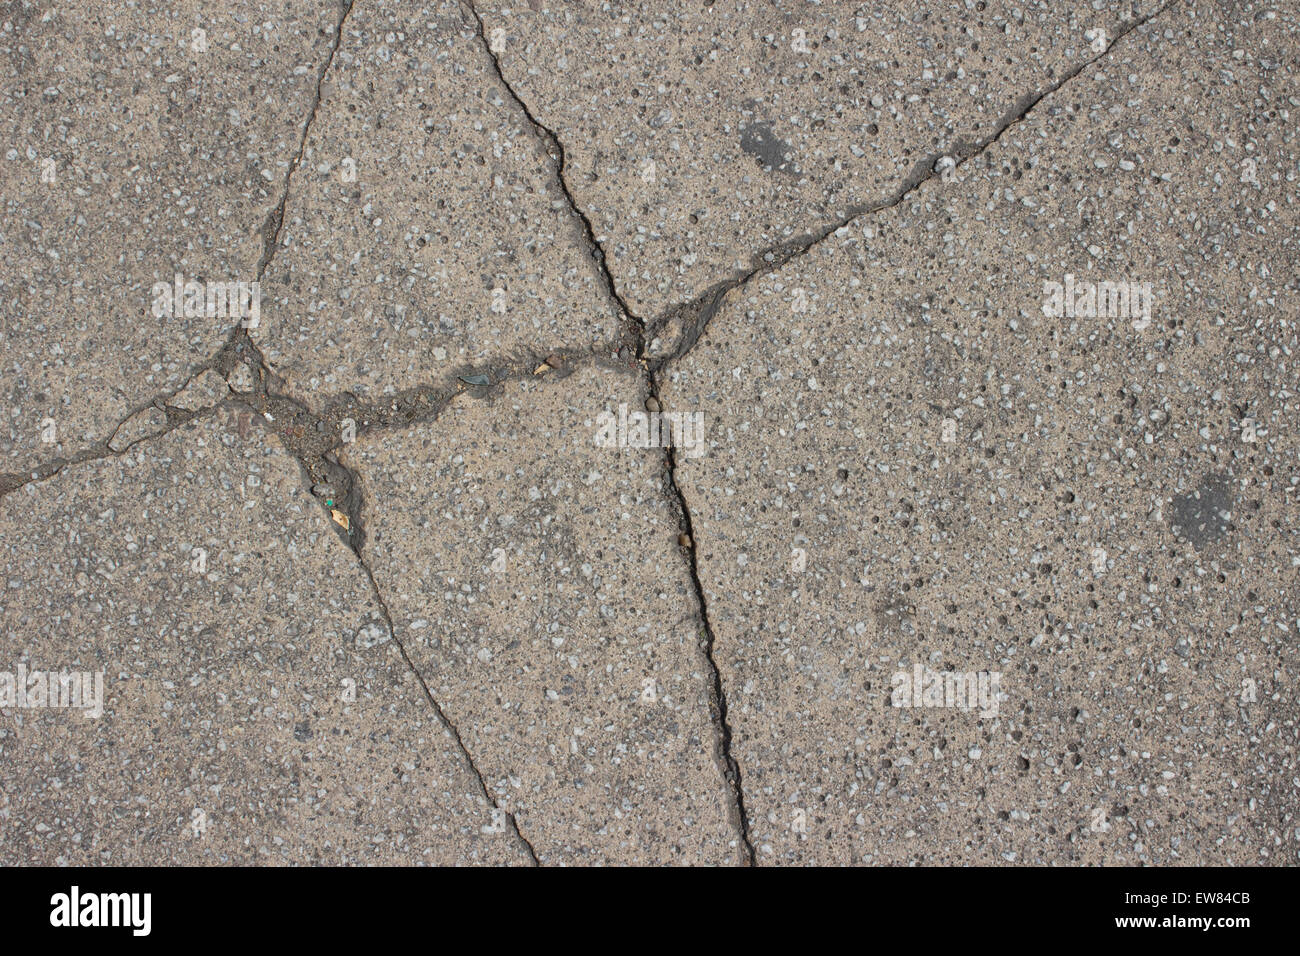 close up of cracked paving slab texture Stock Photo